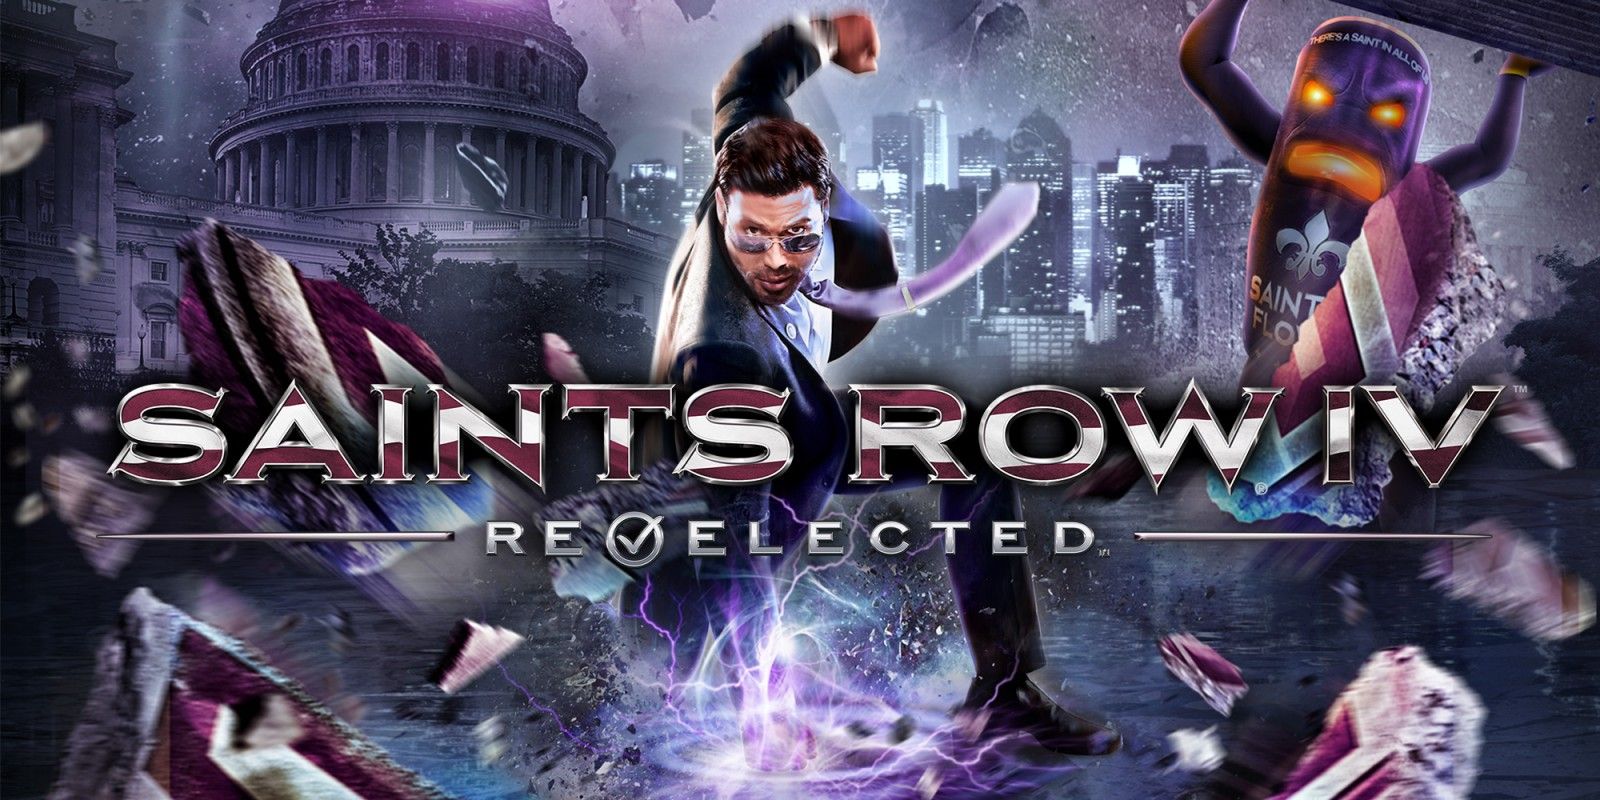 Grab Saints Row IV Re-Elected for free on PC this week